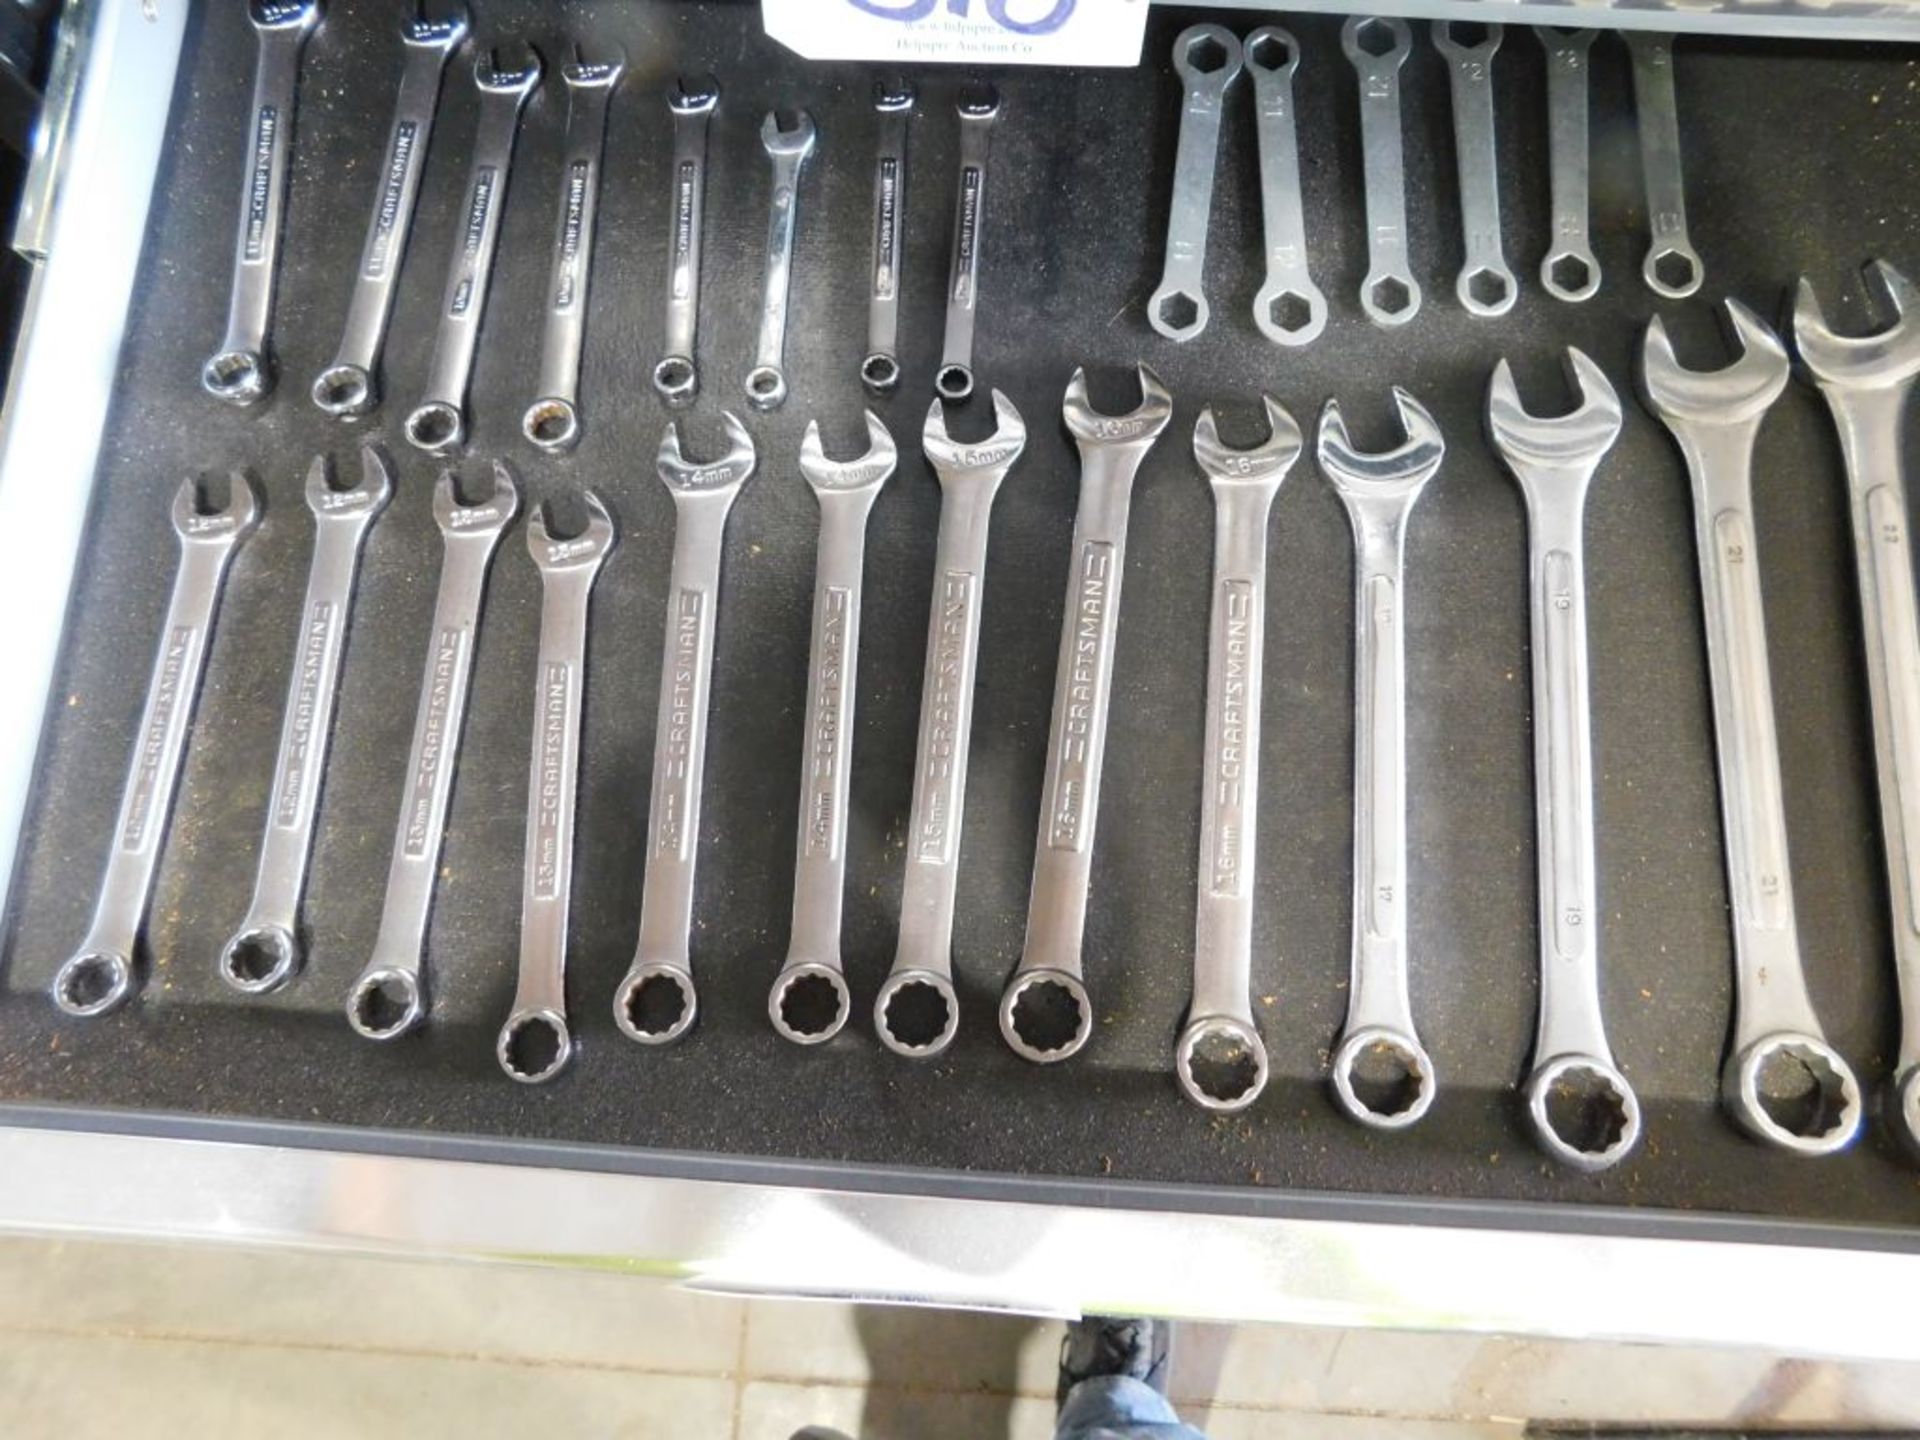 Craftsman metric wrenches, 7 mm-22 mm, (approx. 27 pcs.). (Located at and to be picked up at: 2862